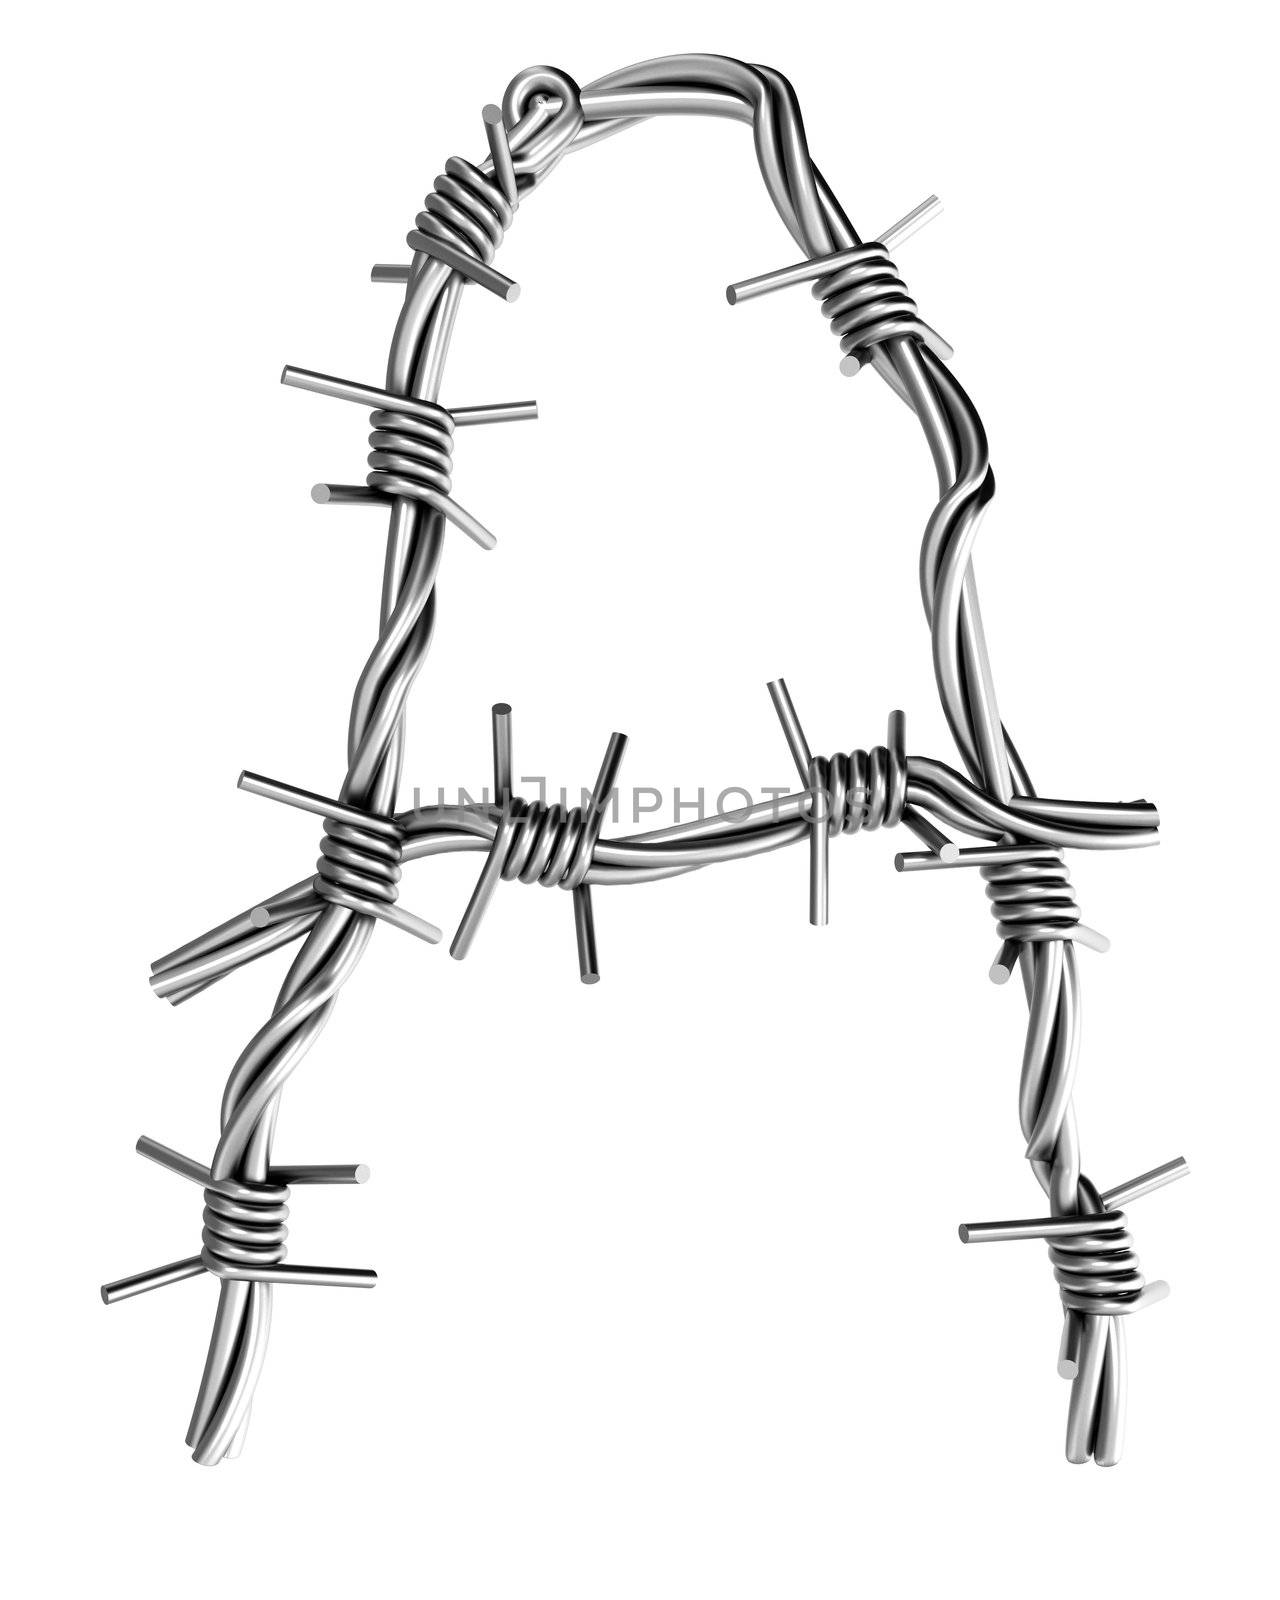 Letter A made from barbed wire